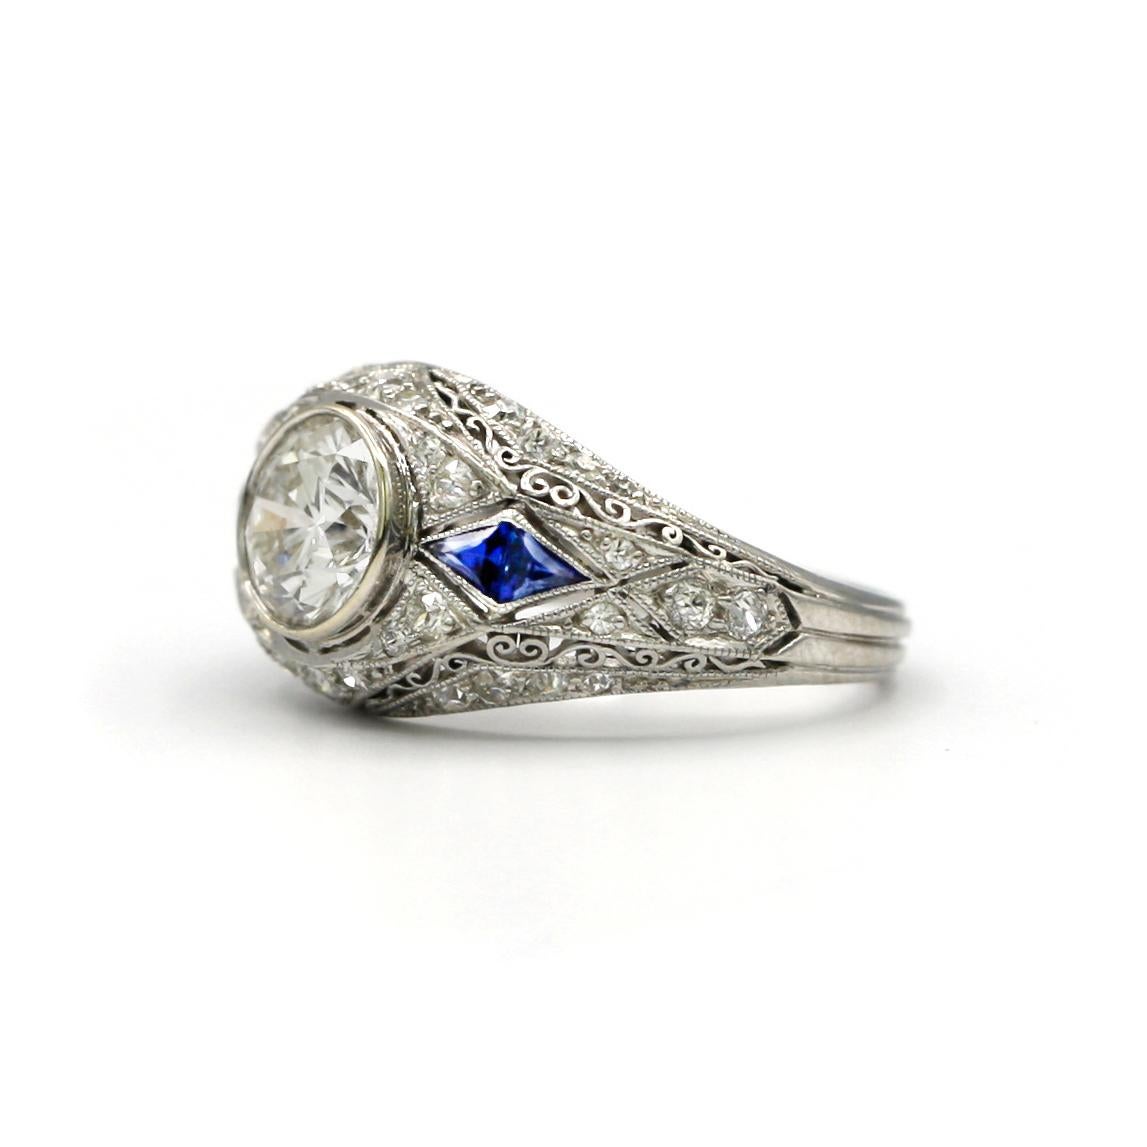 This beautifully detailed 18 Karat White Gold Art Deco ring features a center white round diamond, weighing approximately 1.20 carats, 38 round white diamonds weighing approximately 0.40ct and 4 triangle shaped sapphires weighing approximately